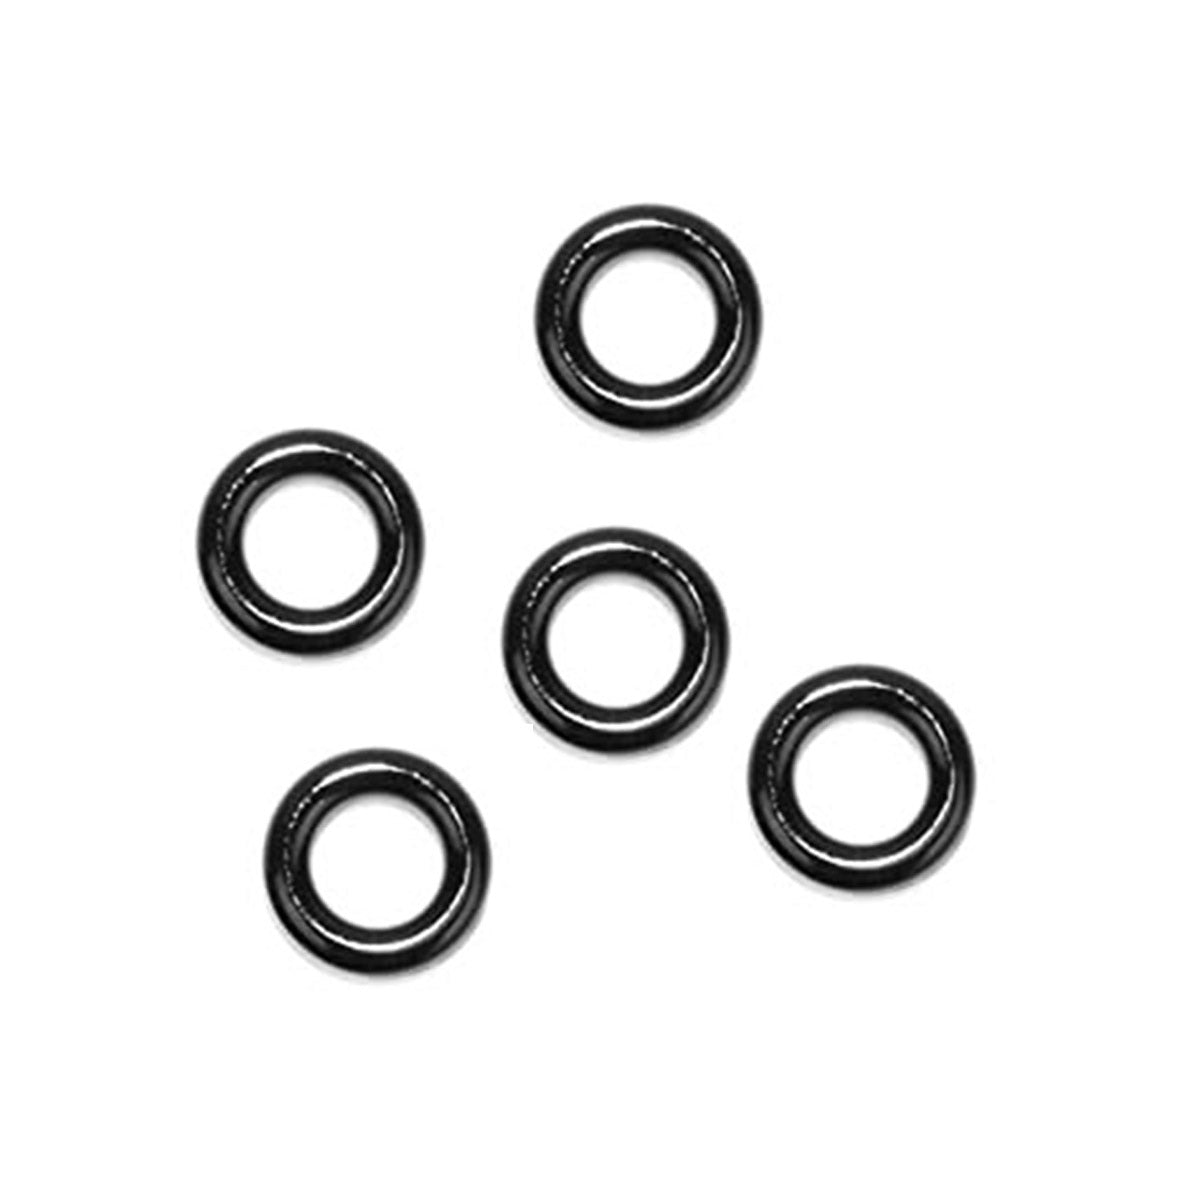 Game Ready O-Rings, Wrap Connector Replacement (5 Rings per pack)